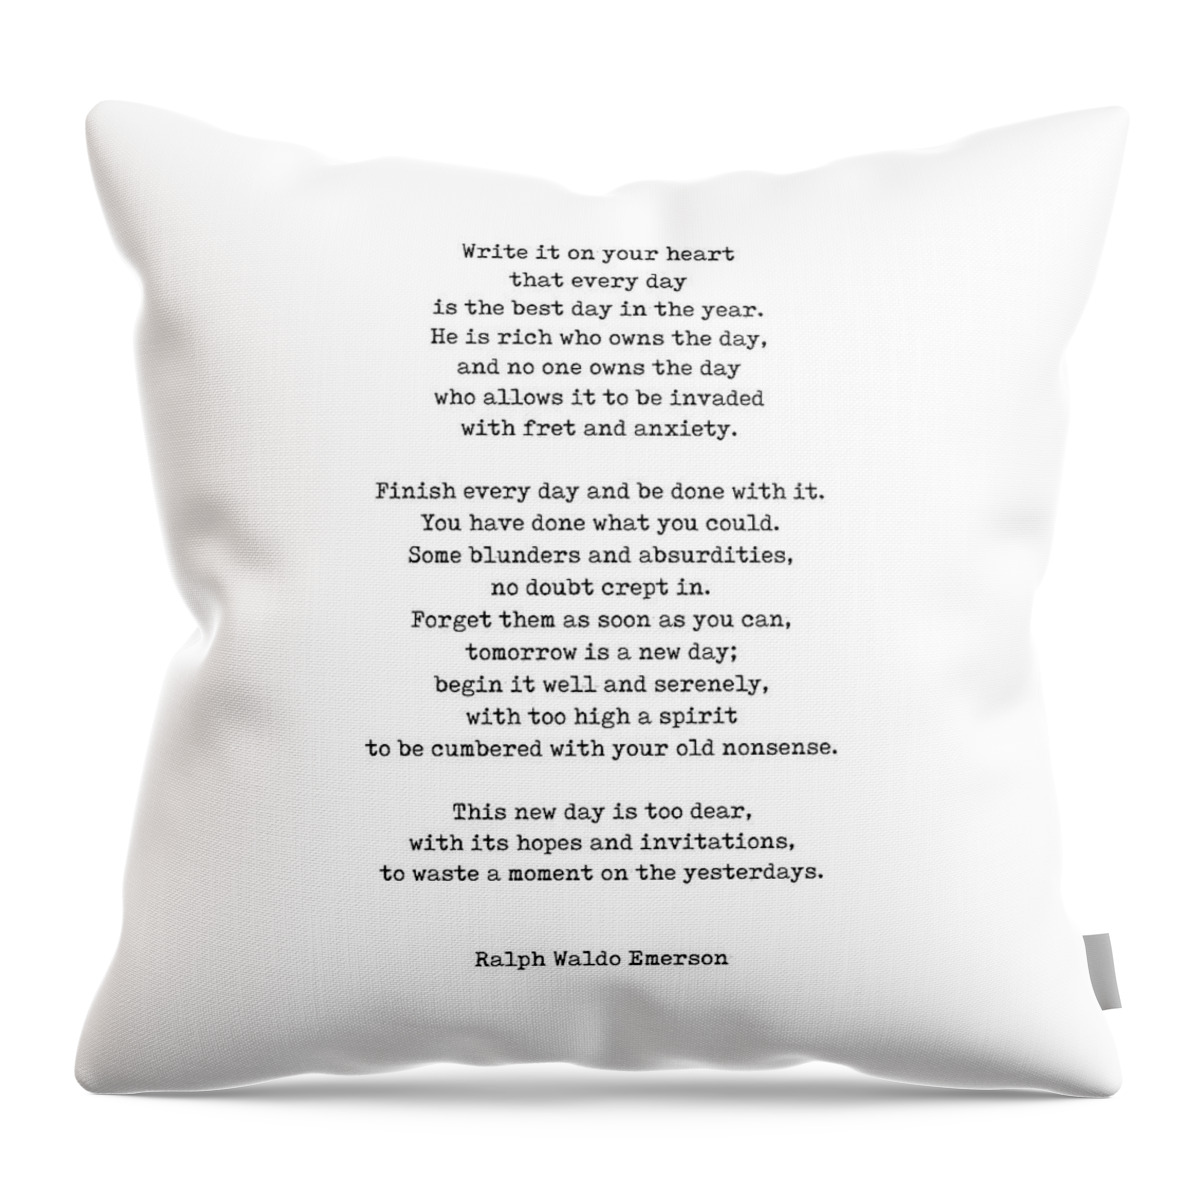 Ralph Waldo Emerson Throw Pillow featuring the digital art Ralph Waldo Emerson Quote - He is rich who owns the day - Minimal, Black and White, Typewriter Print by Studio Grafiikka